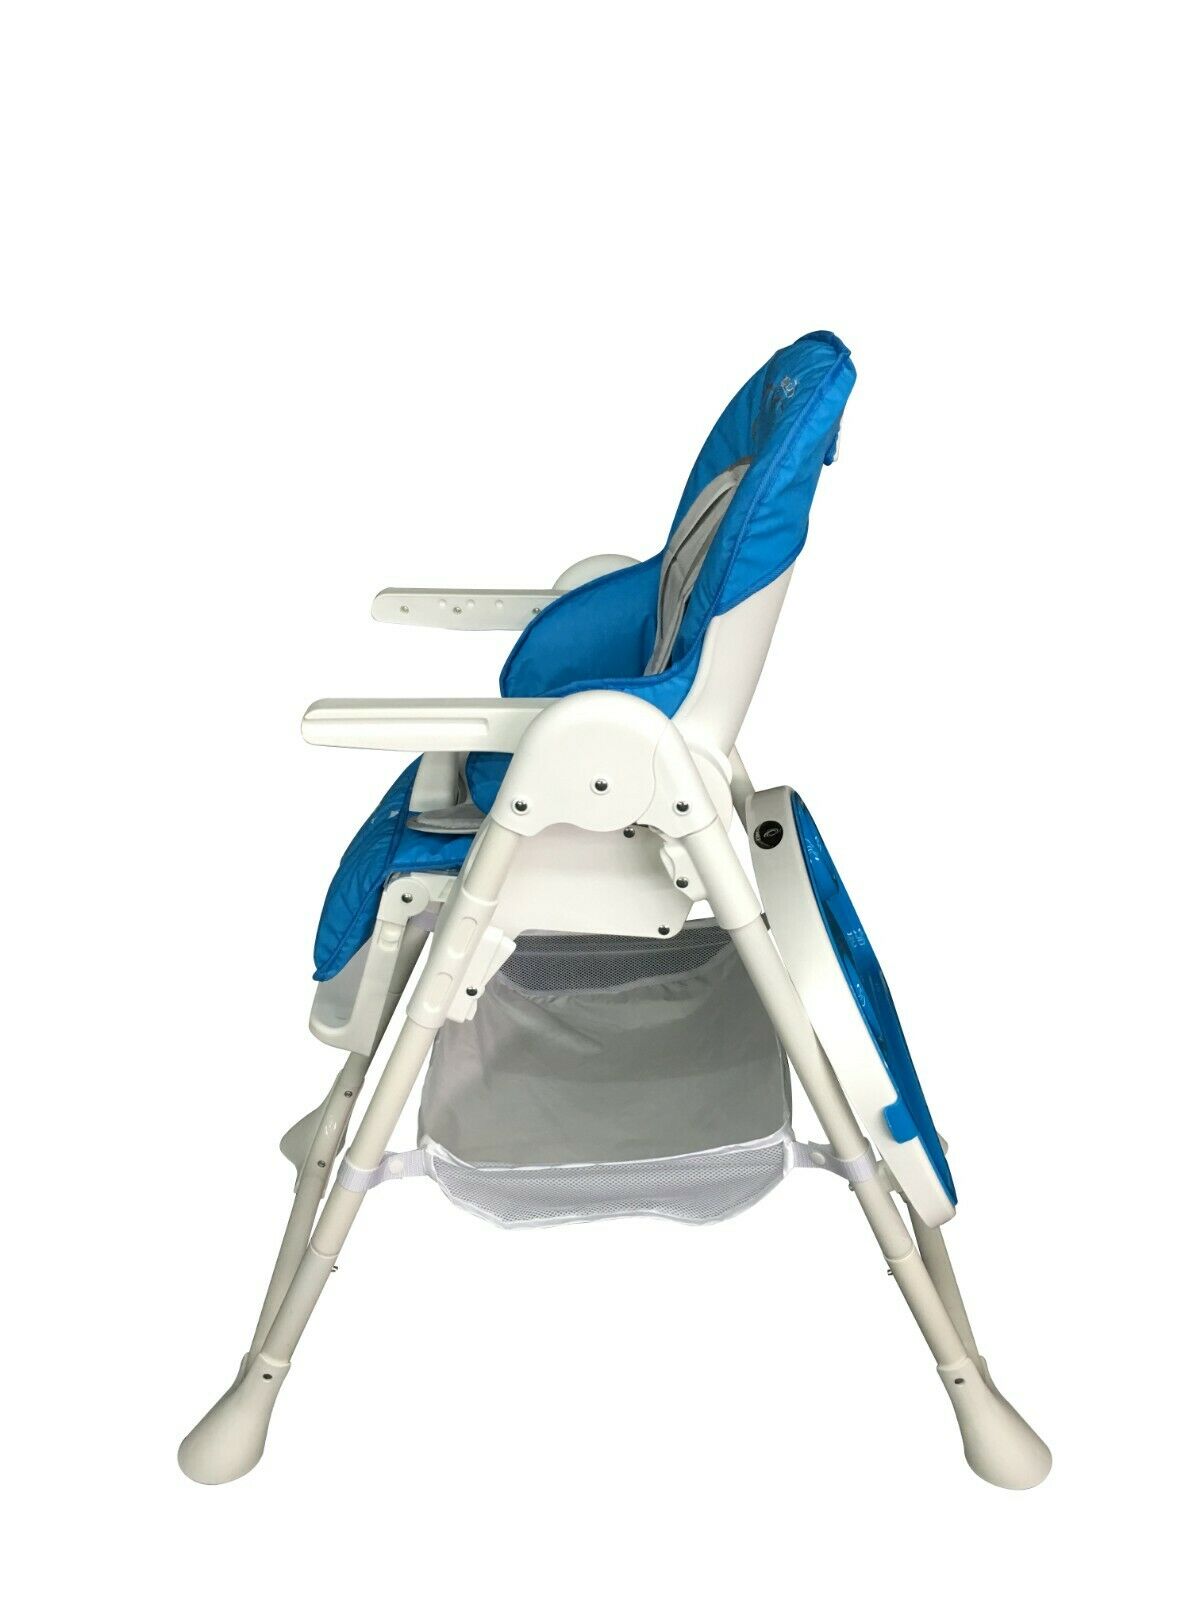 Multifunction Portable 3 IN 1 Baby High Chair Infant Toddler Feeding Nursery UK